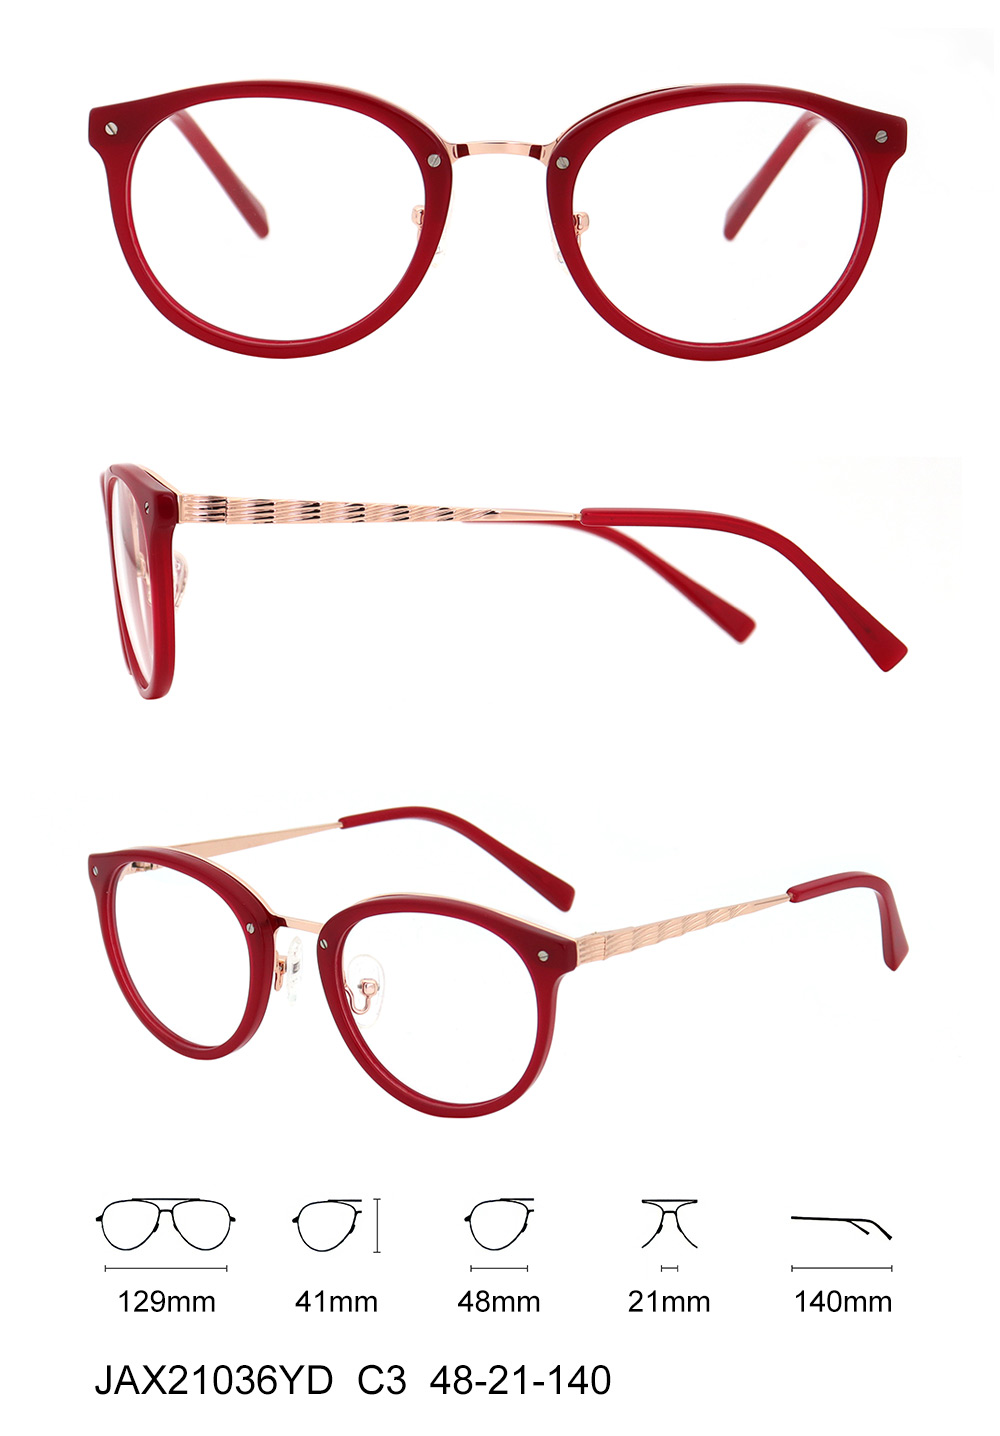 Fashion mixed material eyewear from classic style